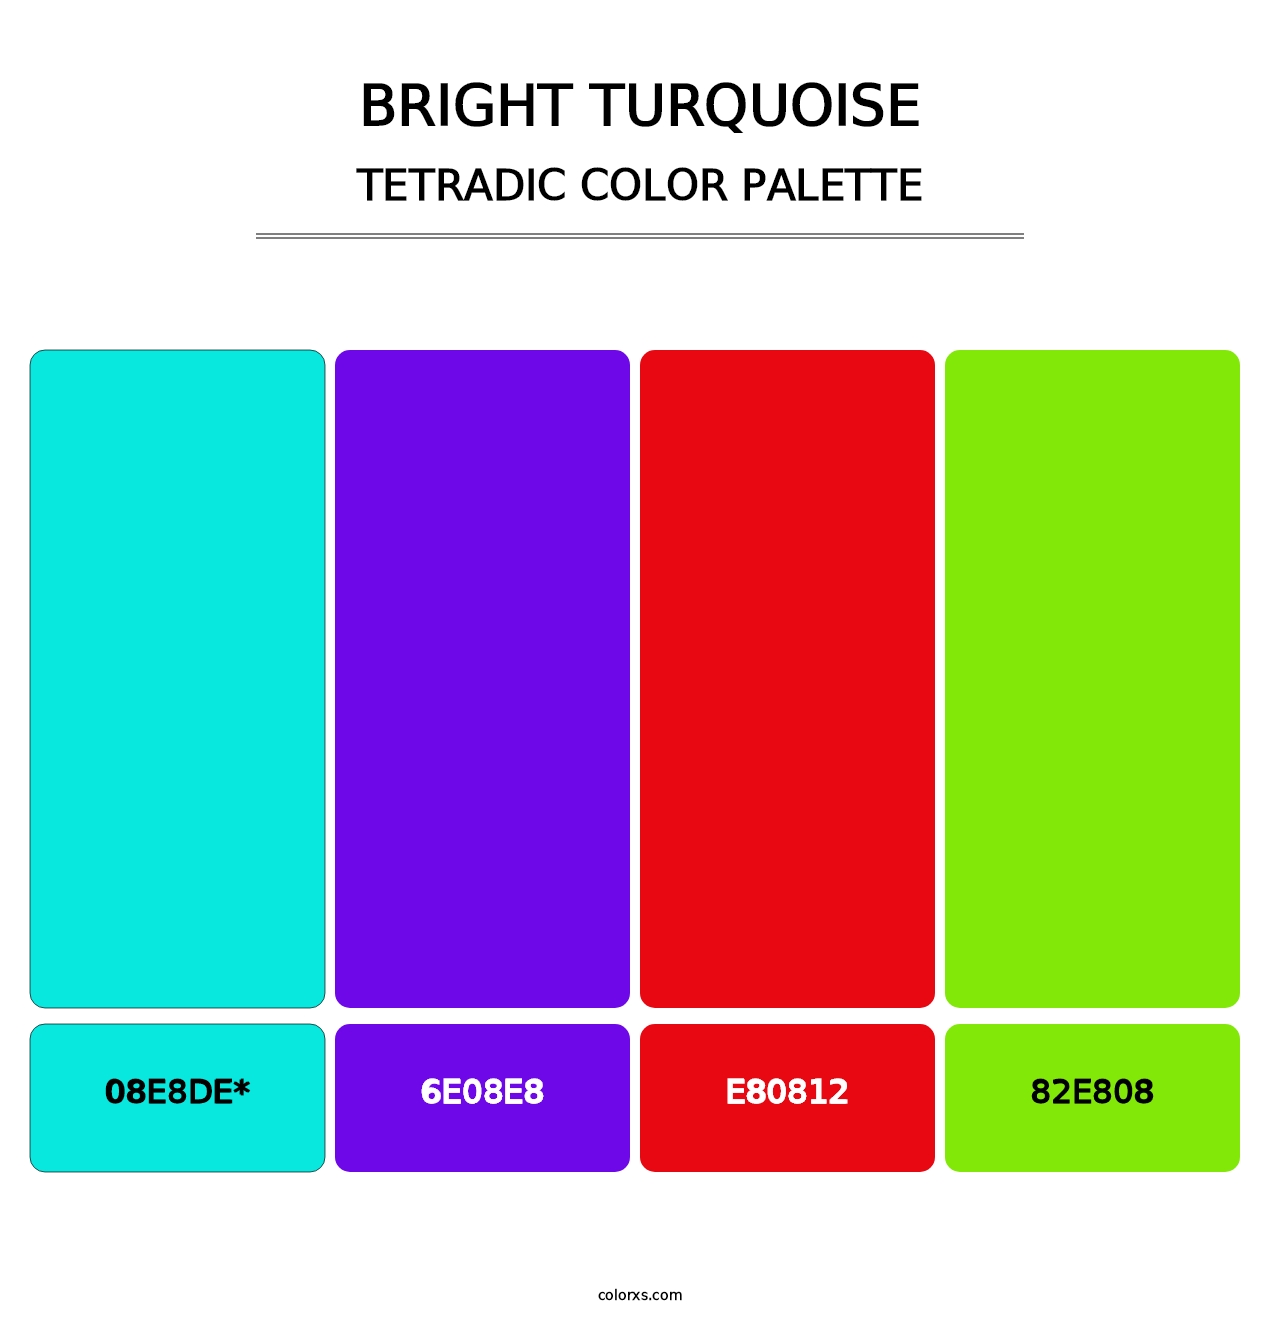 Bright Turquoise - Tetradic Color Palette